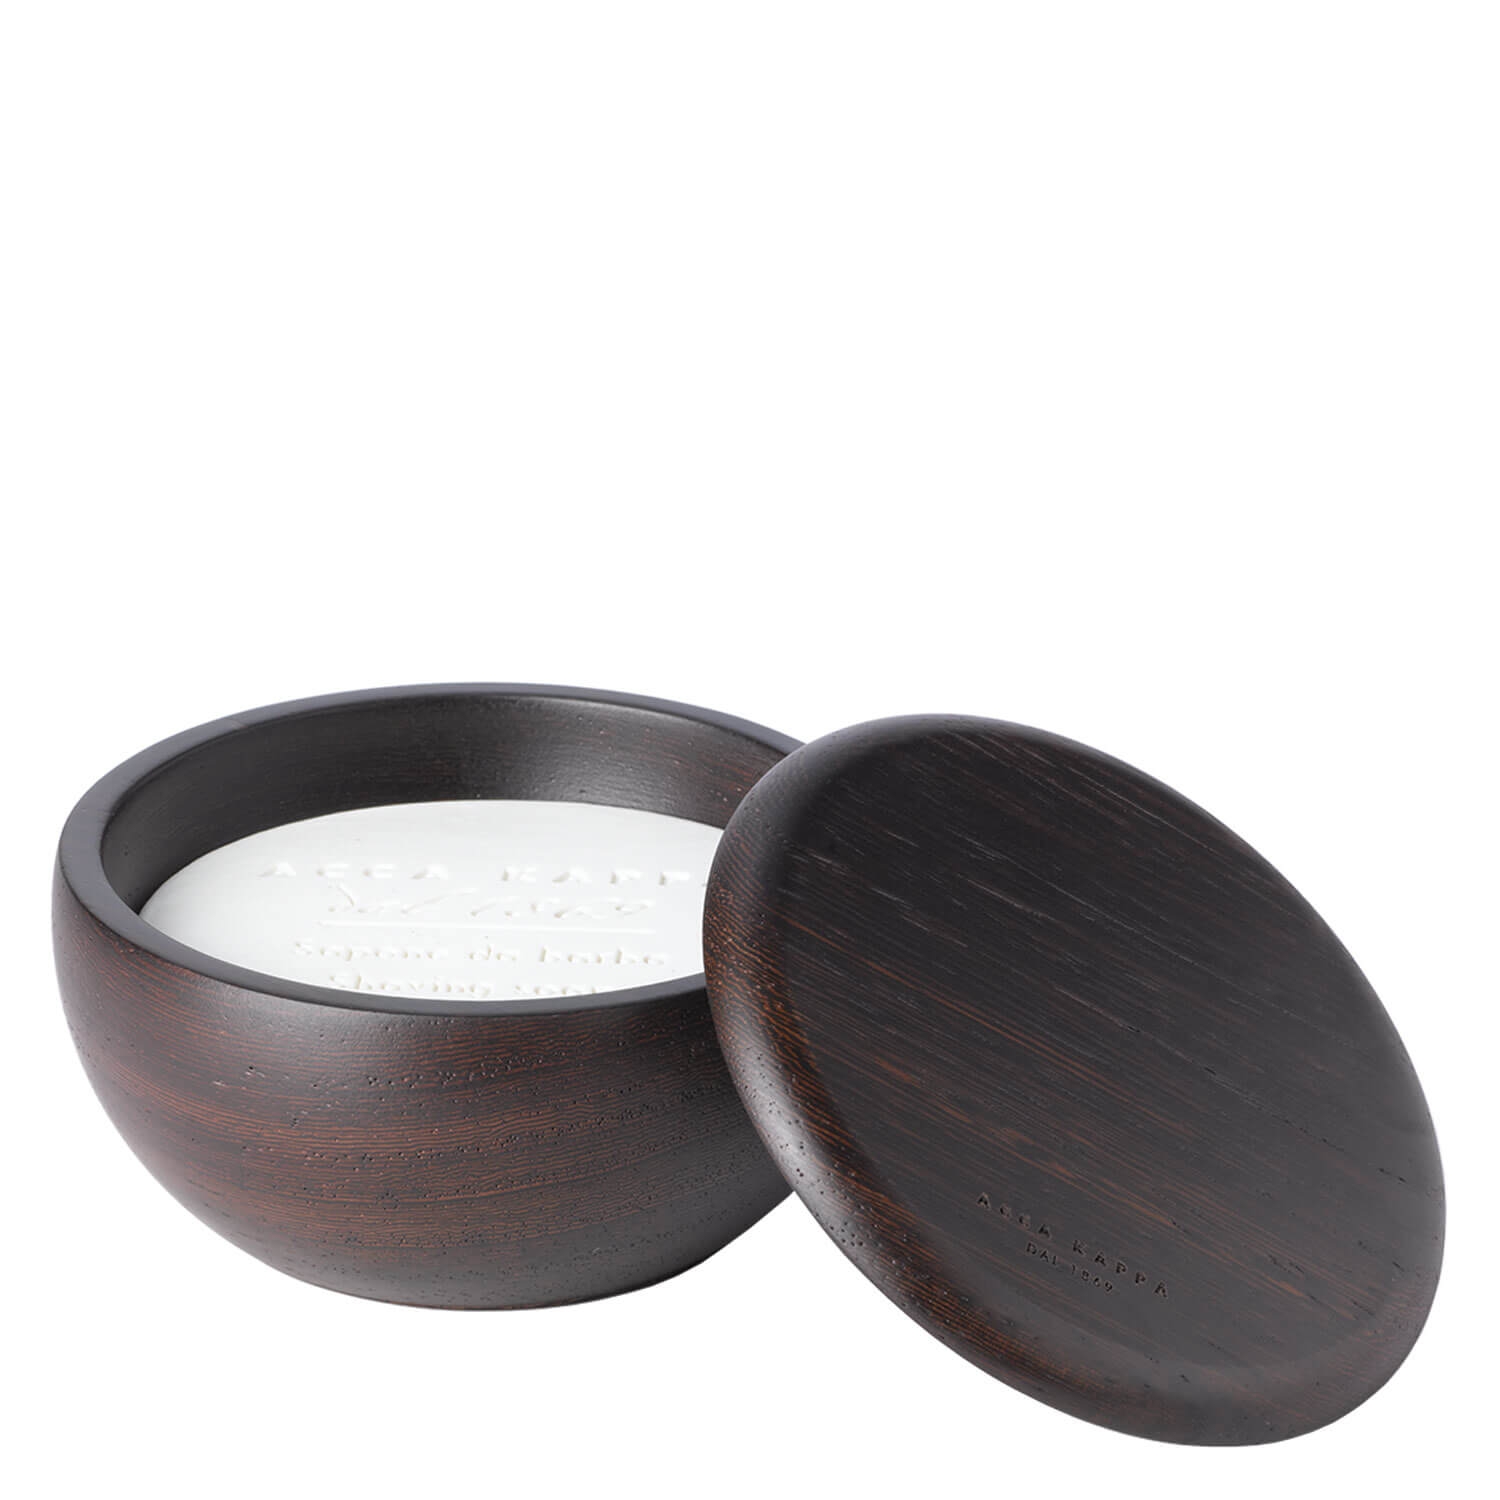 Product image from ACCA KAPPA - Wenge Bowl Almond Shaving Soap